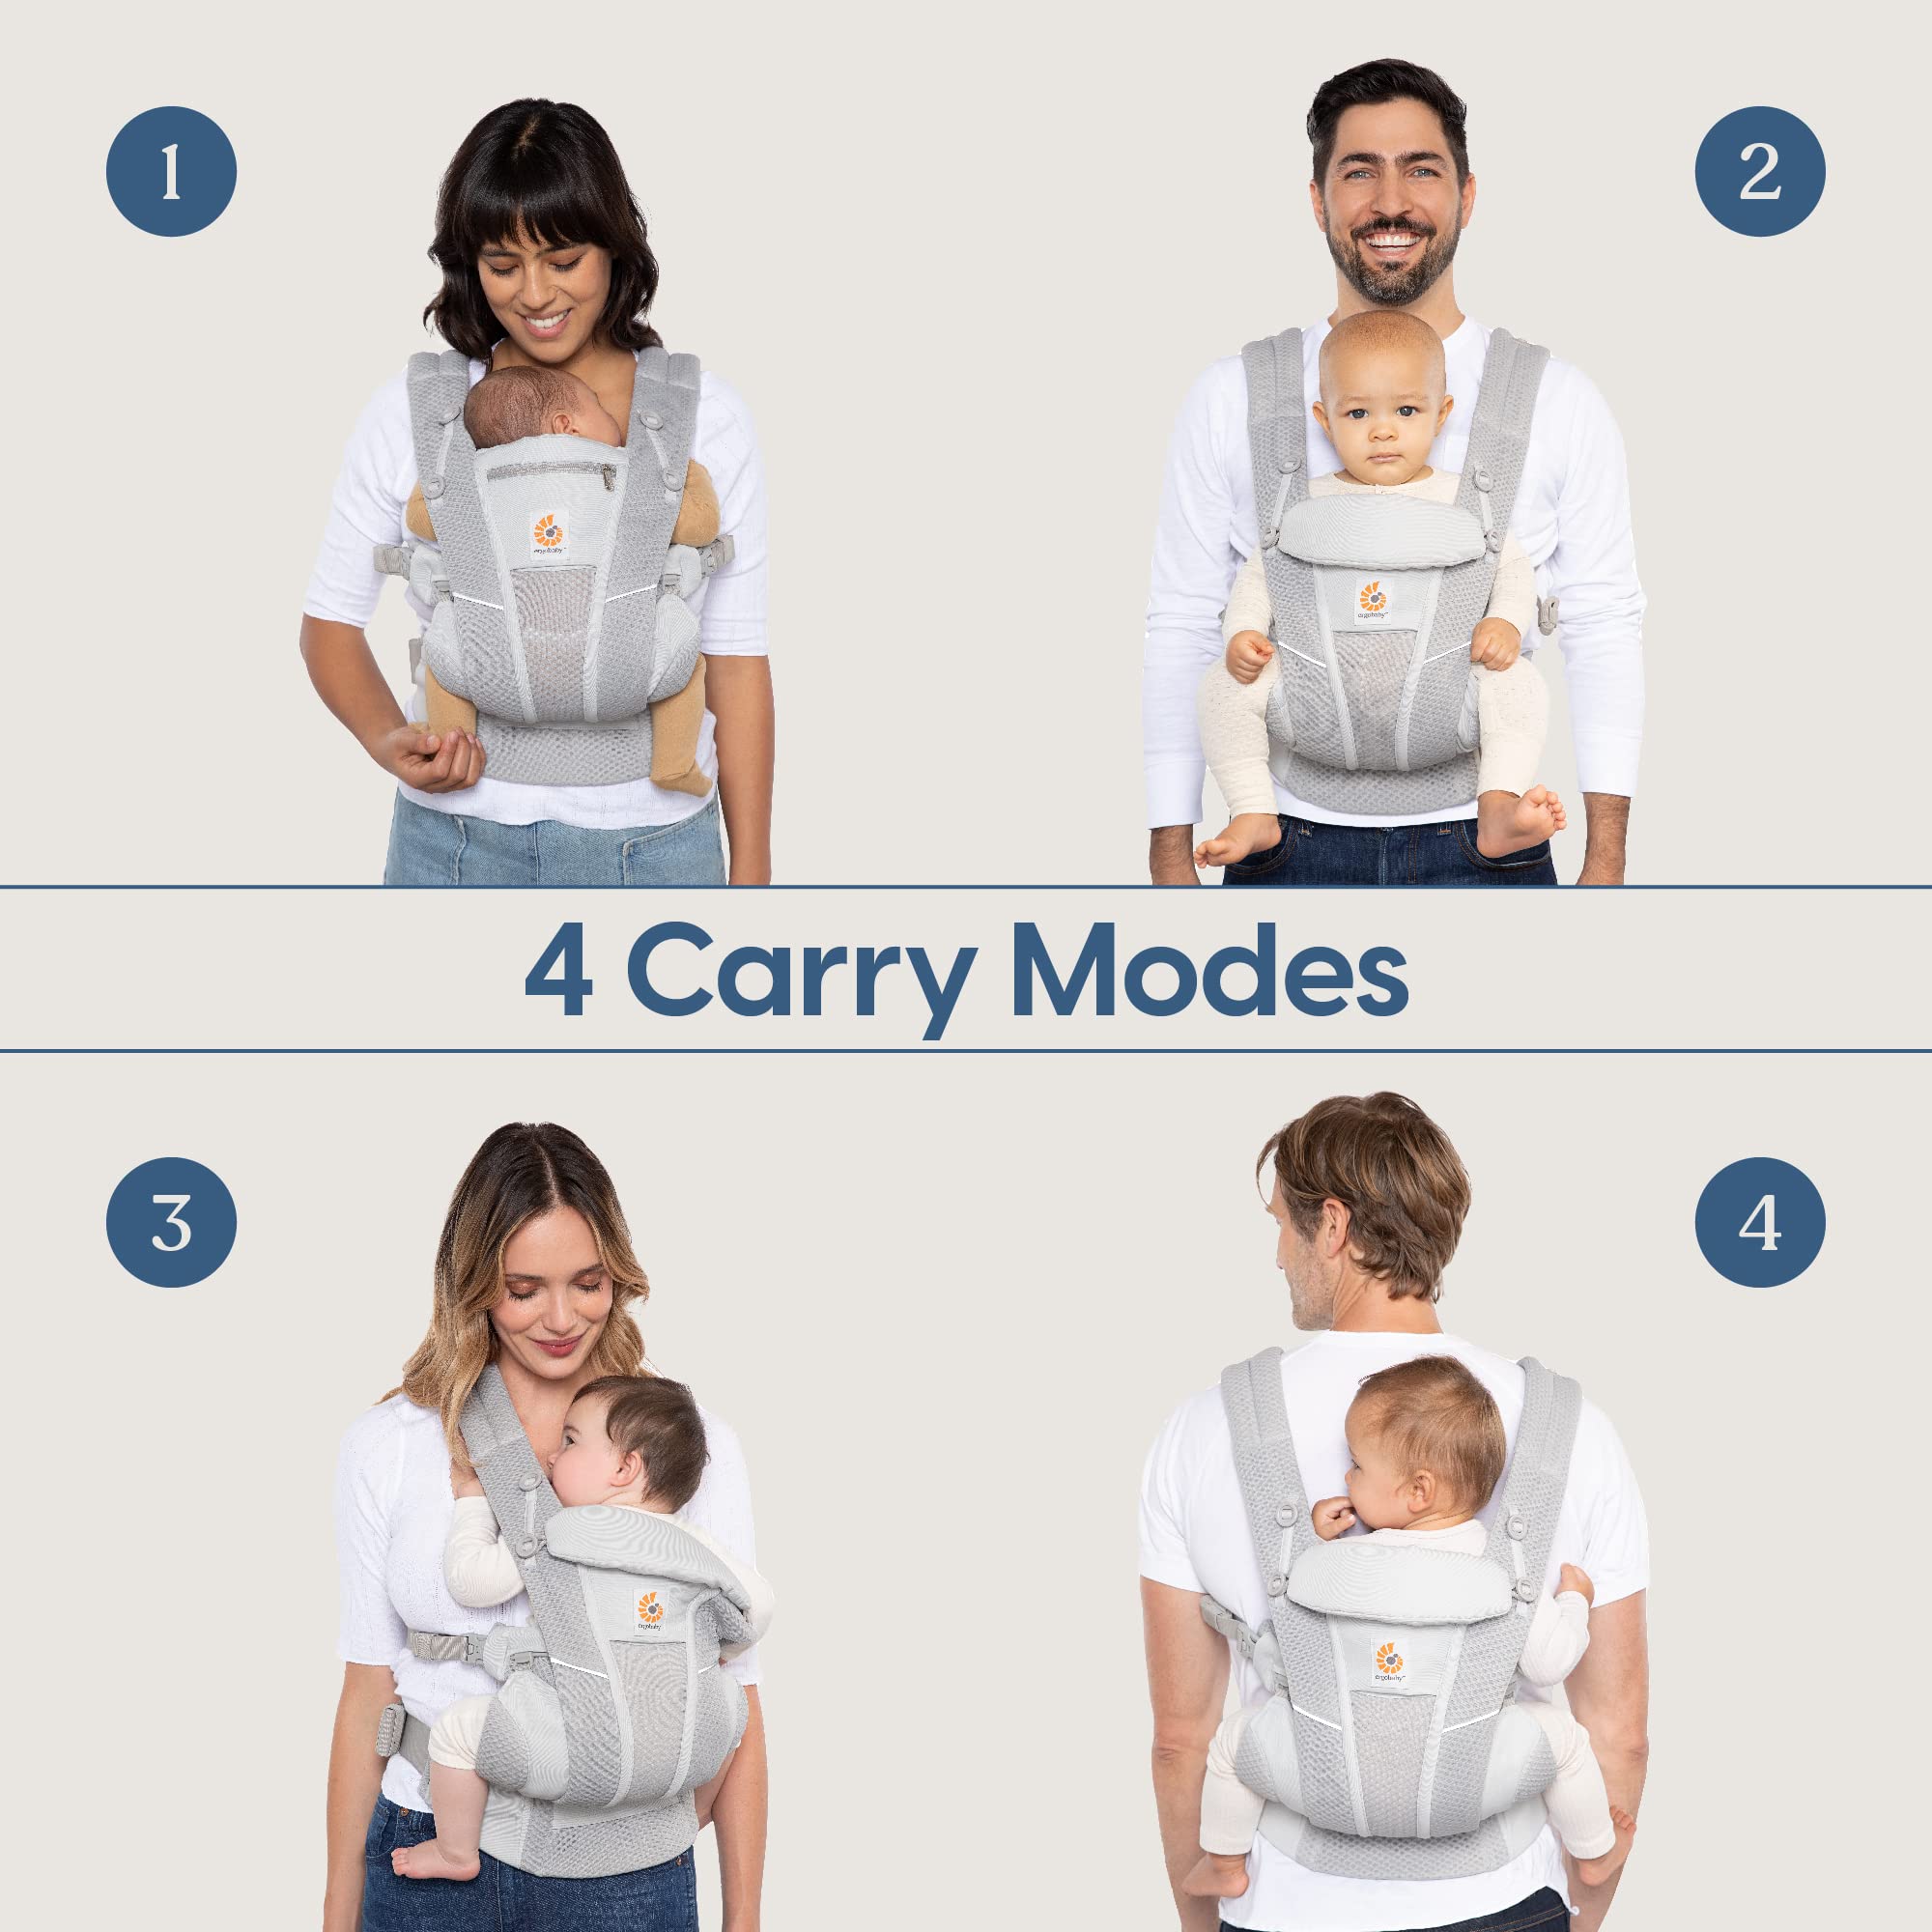 Ergobaby Omni Breeze All Carry Positions Breathable Mesh Baby Carrier with Enhanced Lumbar Support & Airflow (7-45 Lb), Sapphire Blue